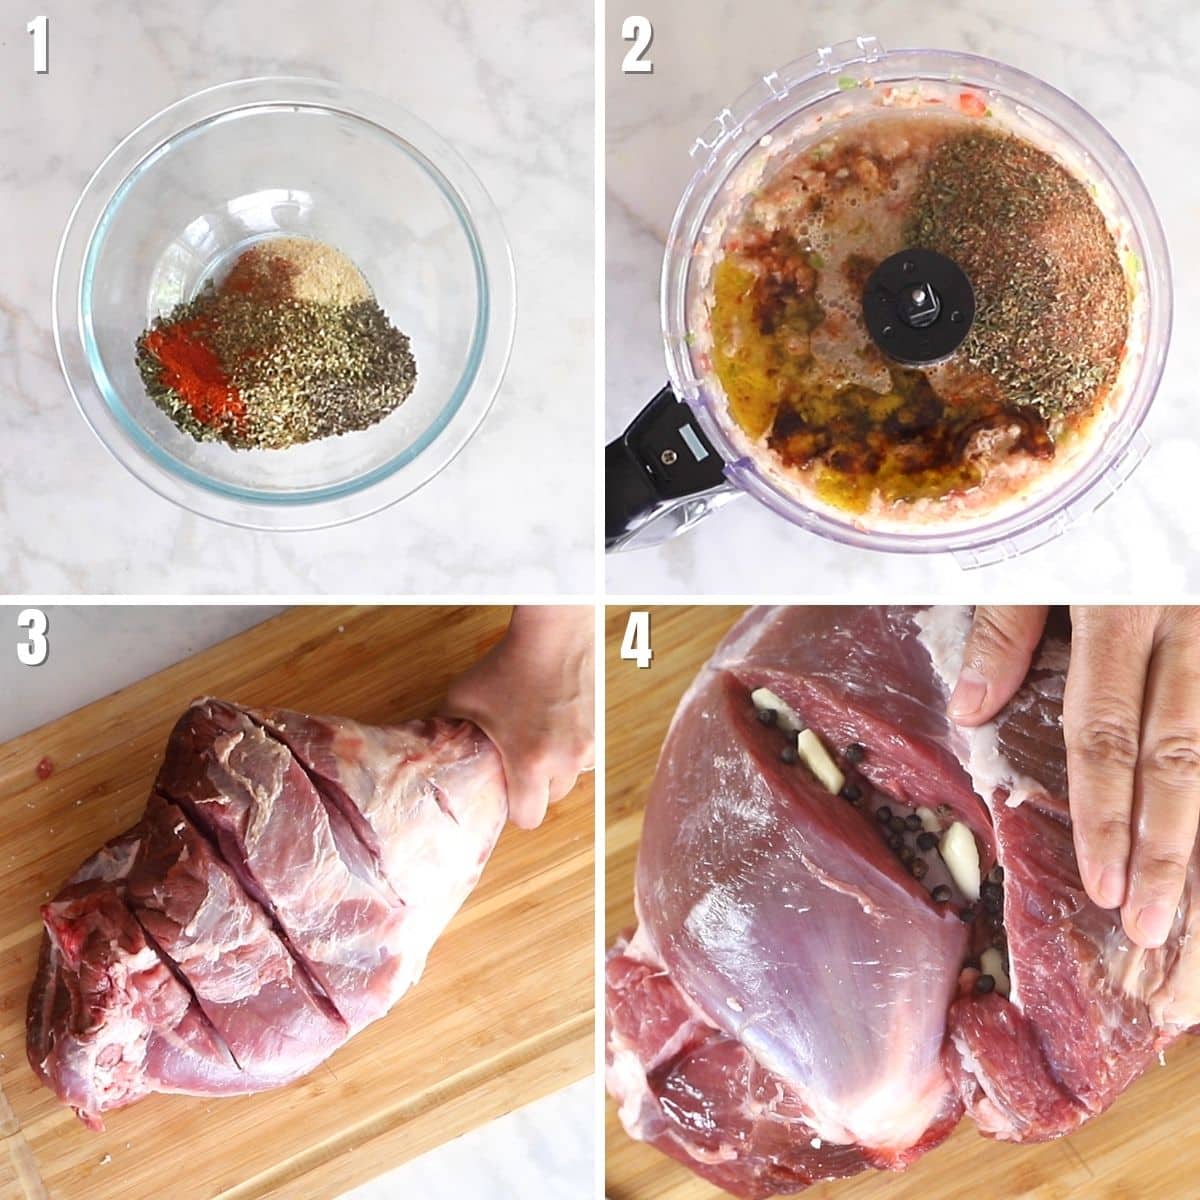 A collage of 4 images showing how to prepare spice mixture and lamb leg to be roasted.